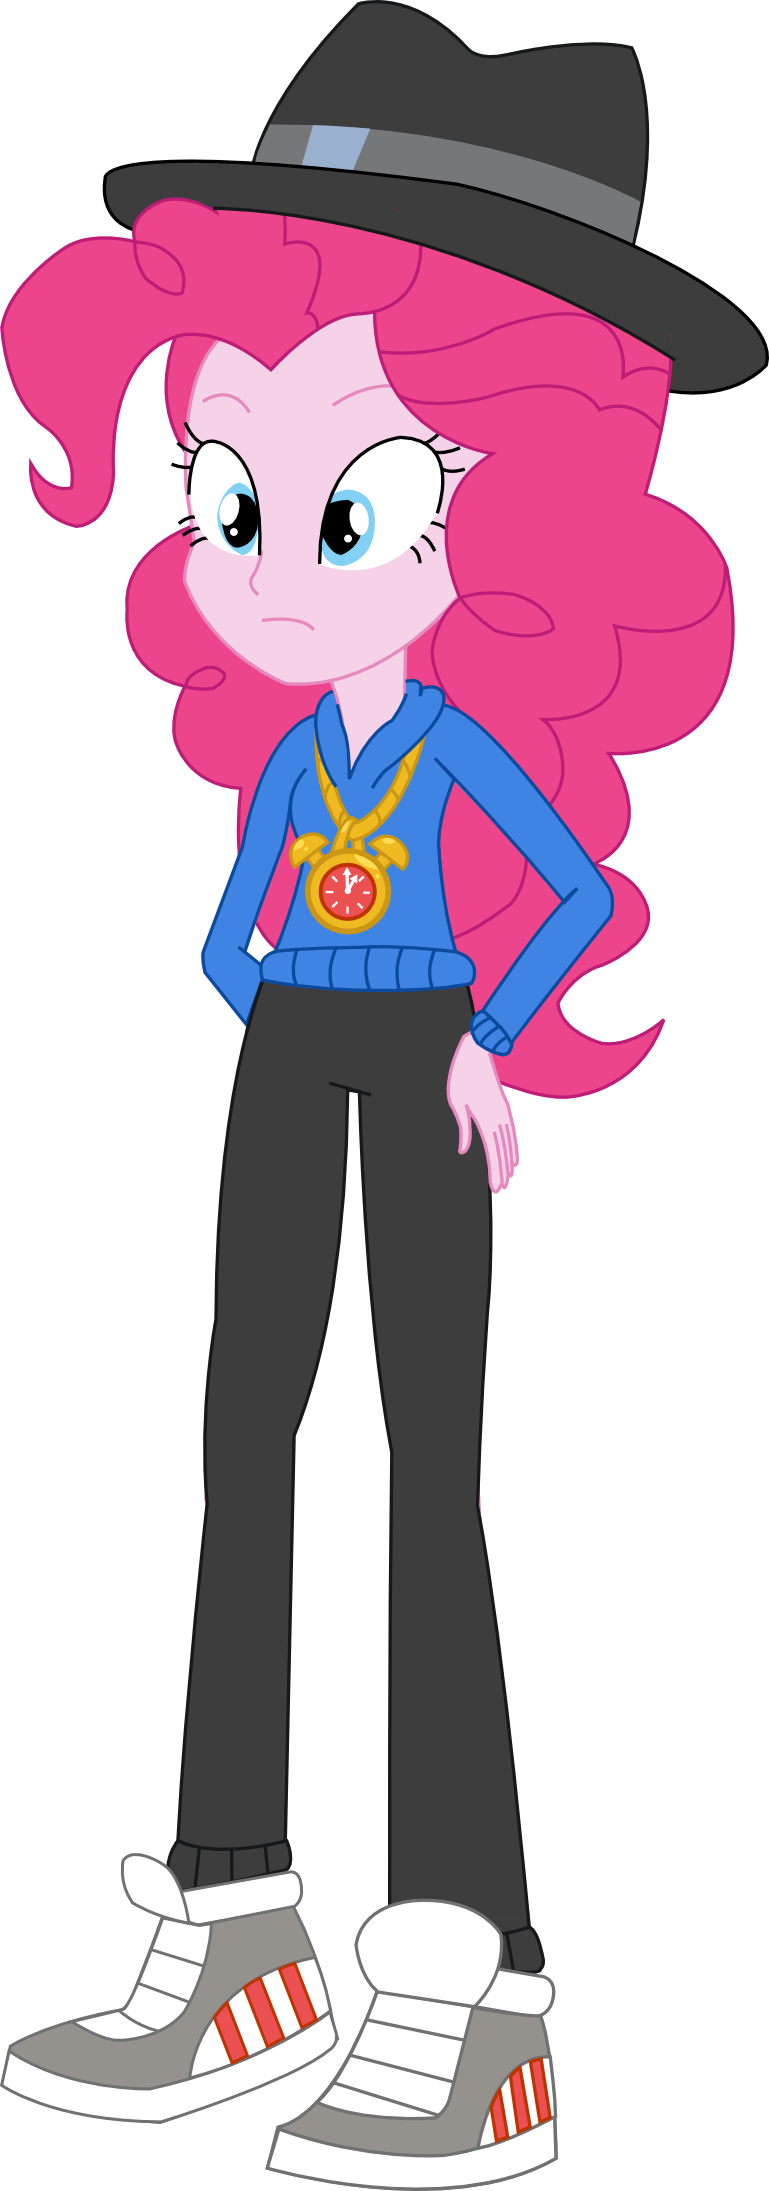 Fanmade Equestria Girls Pinkie Pie Rapper Outfit By - Equestria Girl Pinkie Pie Dress Up (769x2191)